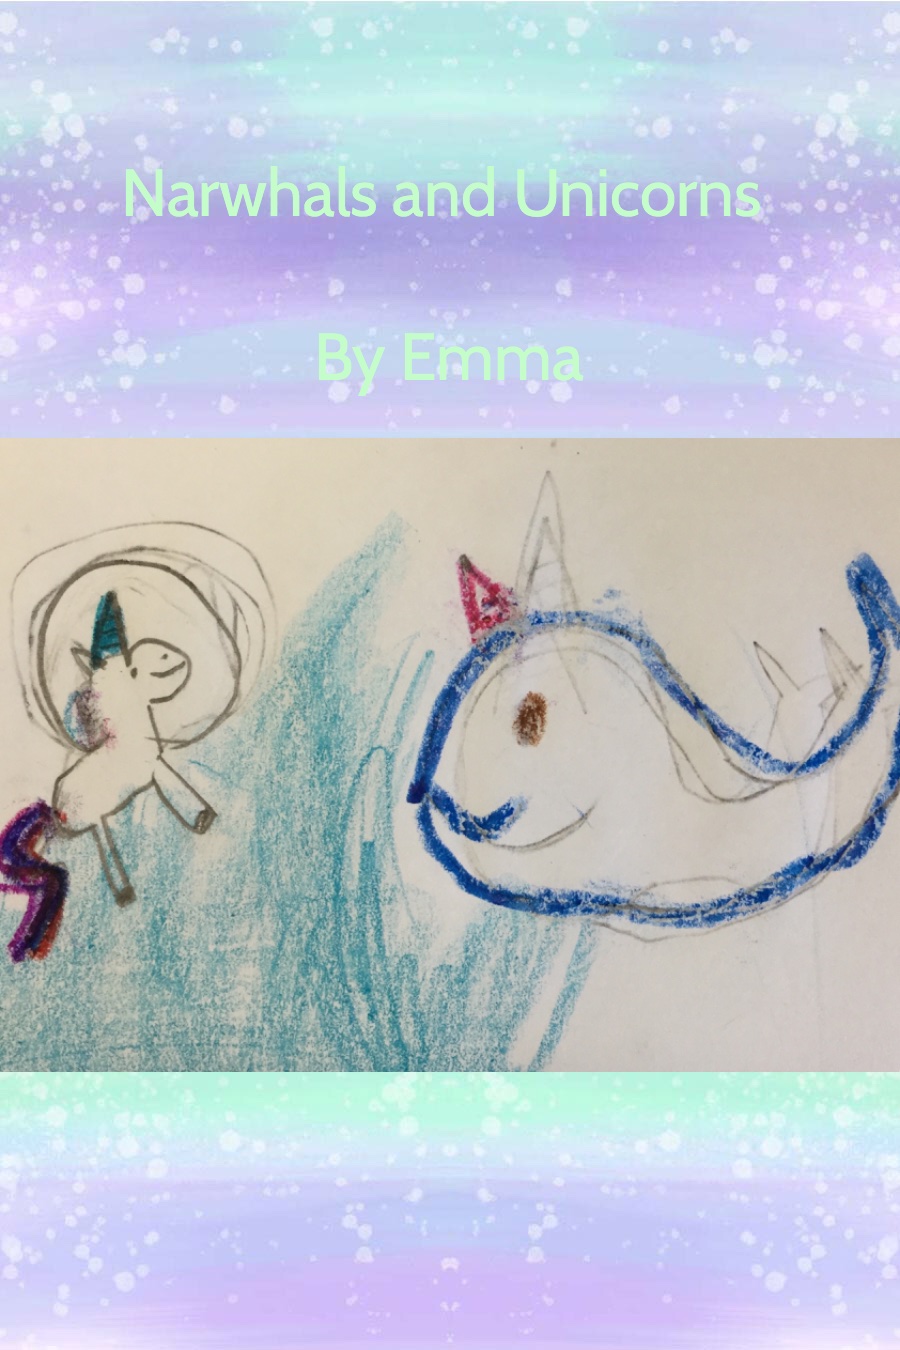 Narwhals and Unicorns by Emma T